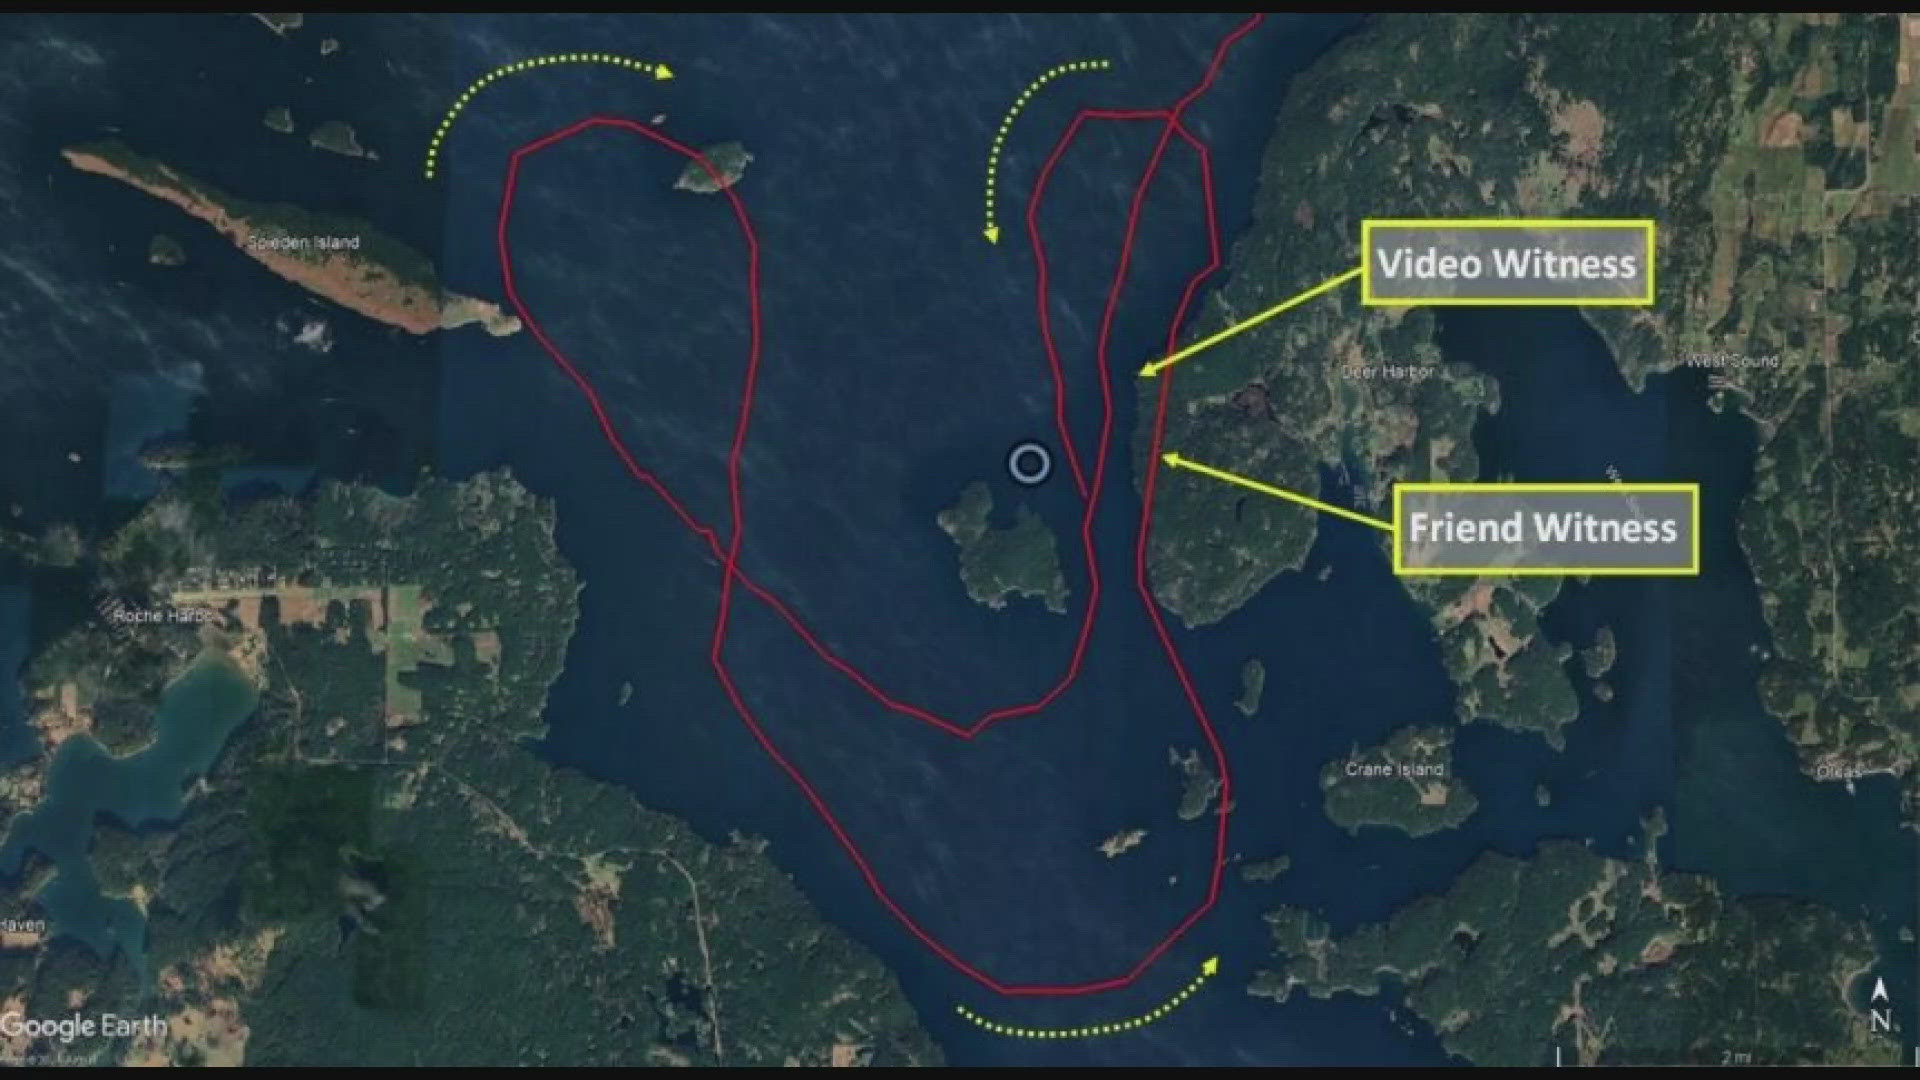 Anders was flying a typical route he called an "Orcas run" on June 7 when he crashed, according to the new report.